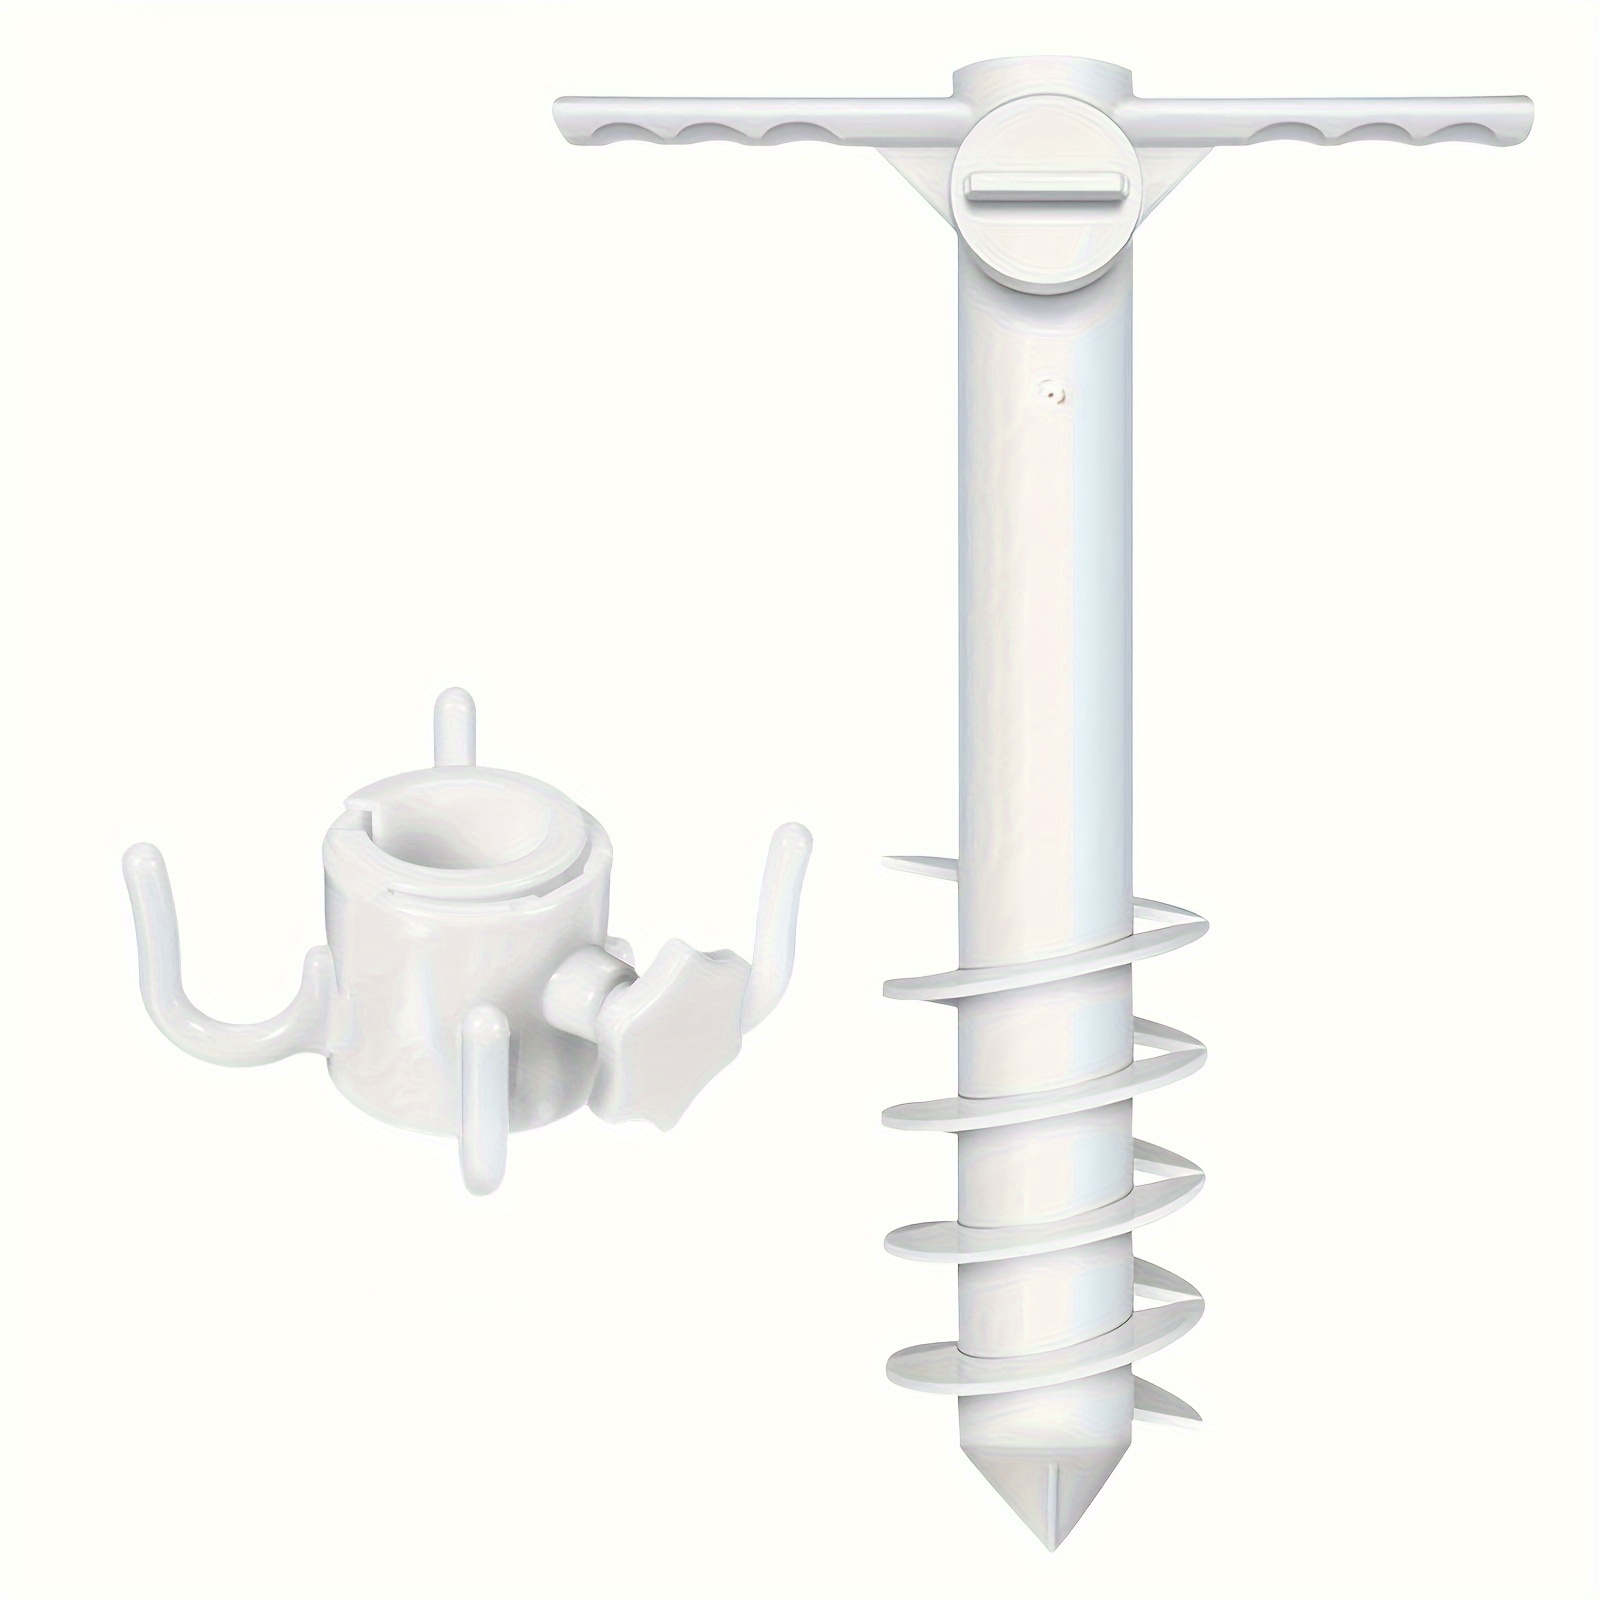 

Sand Anchor, Spiral Sand Anchor For Umbrella, Screw Anchor With Handle For Beach/sand/lawn/land